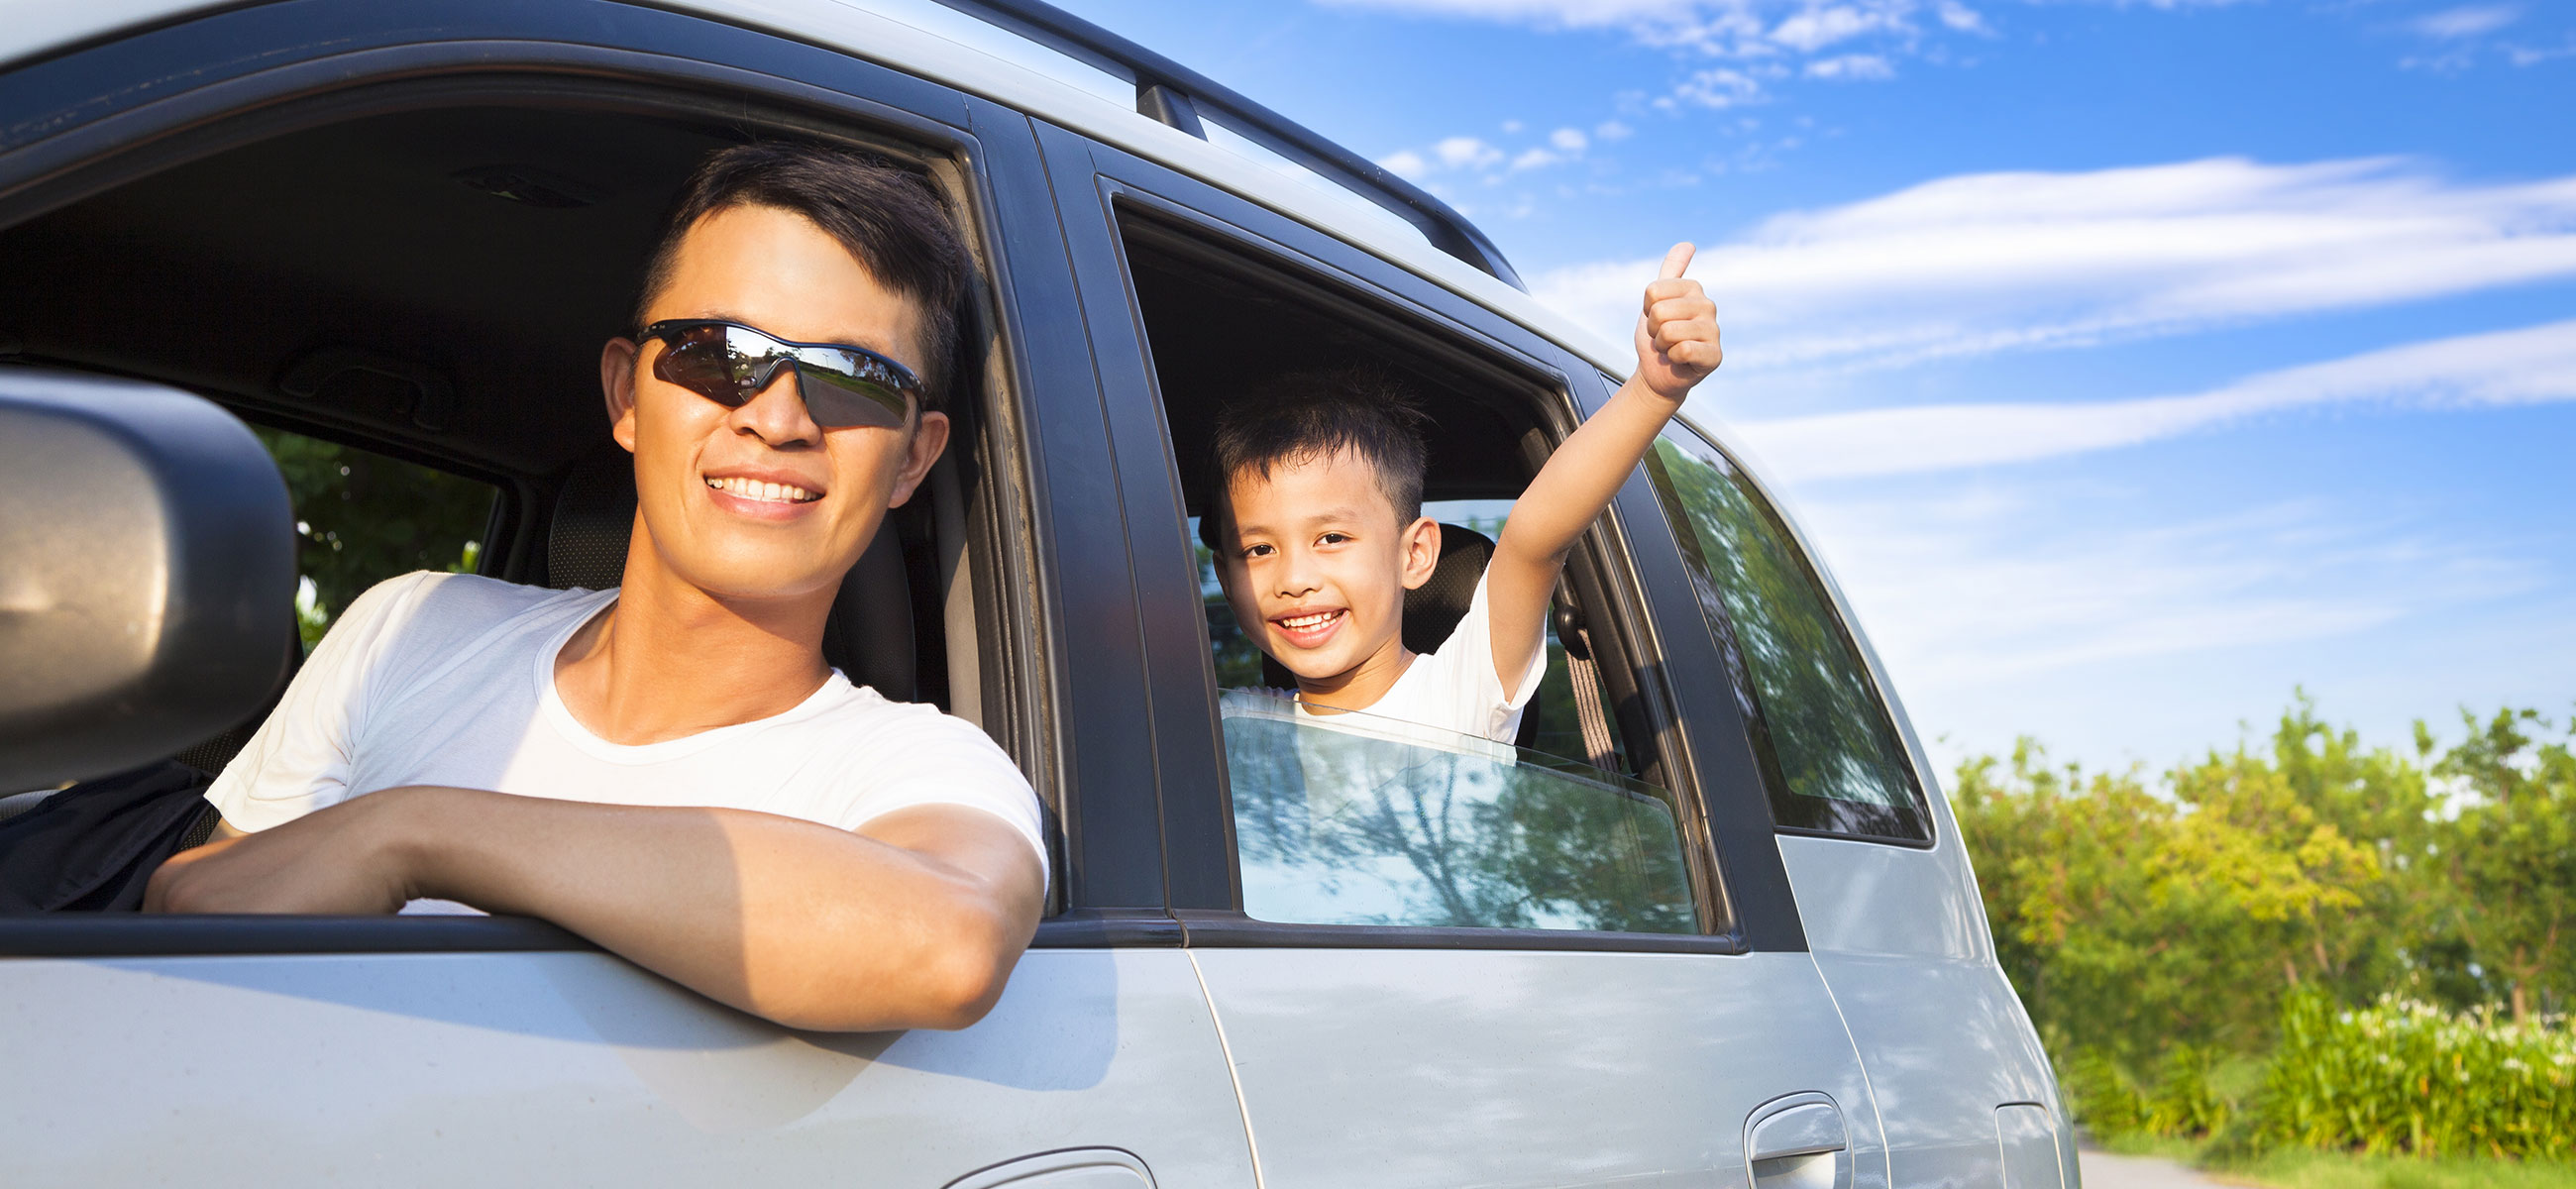 New York Autoowners with auto insurance coverage